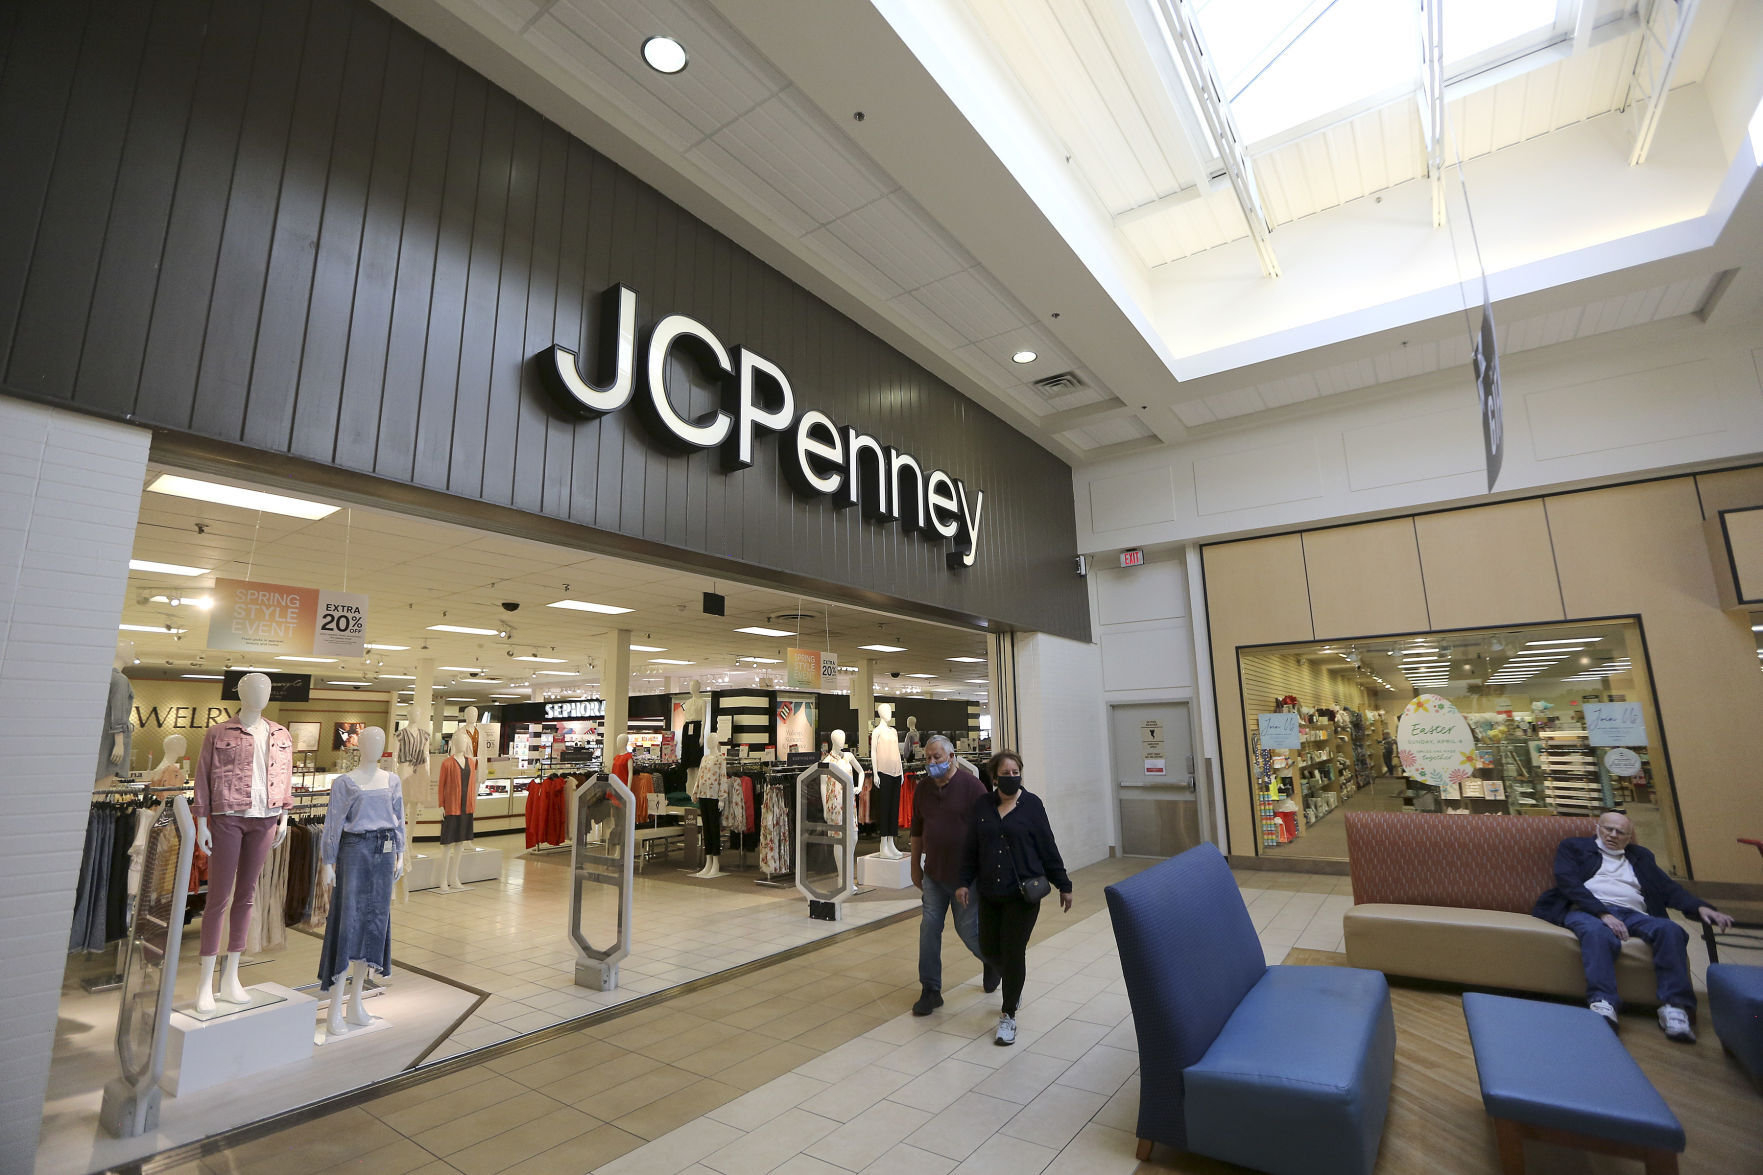 JC Penney has extended their lease with Kennedy Mall in Dubuque.    PHOTO CREDIT: Dave Kettering